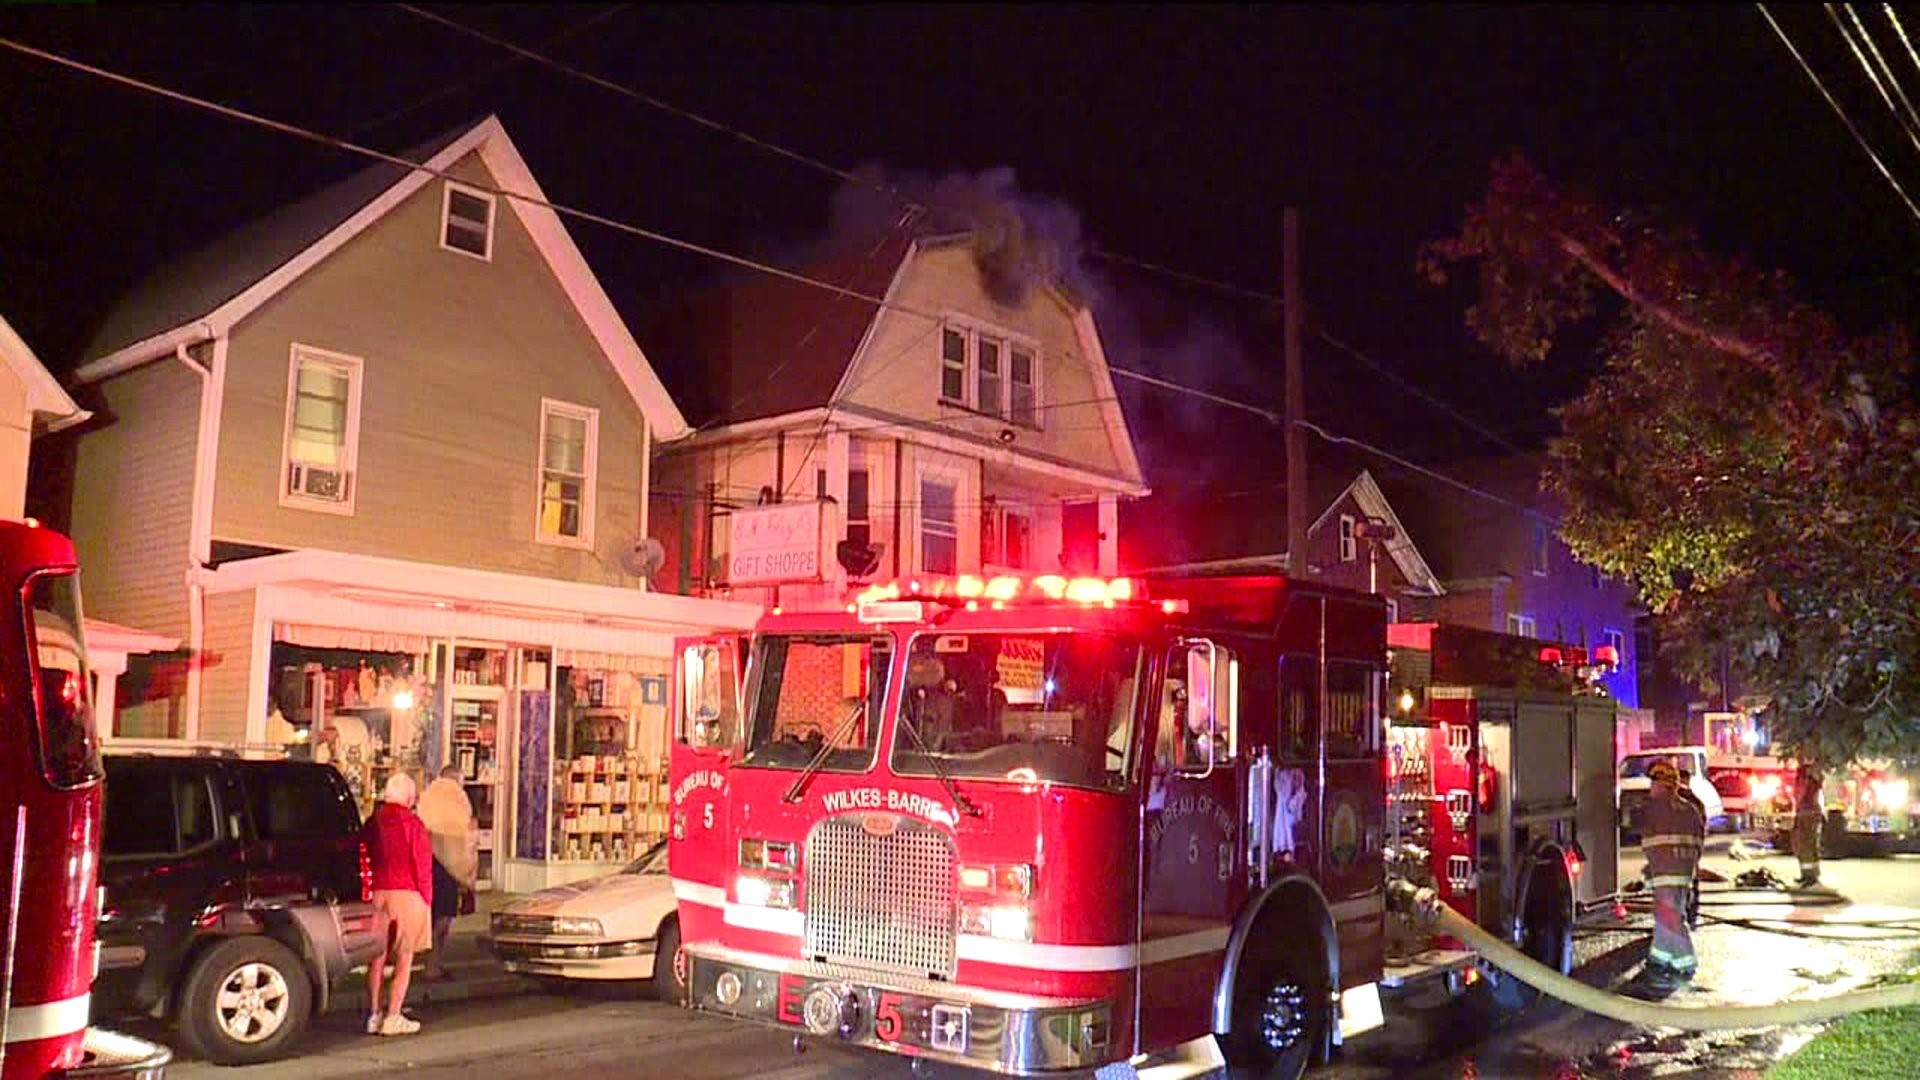 Three Displaced, Business Damaged by Fire in Wilkes-Barre